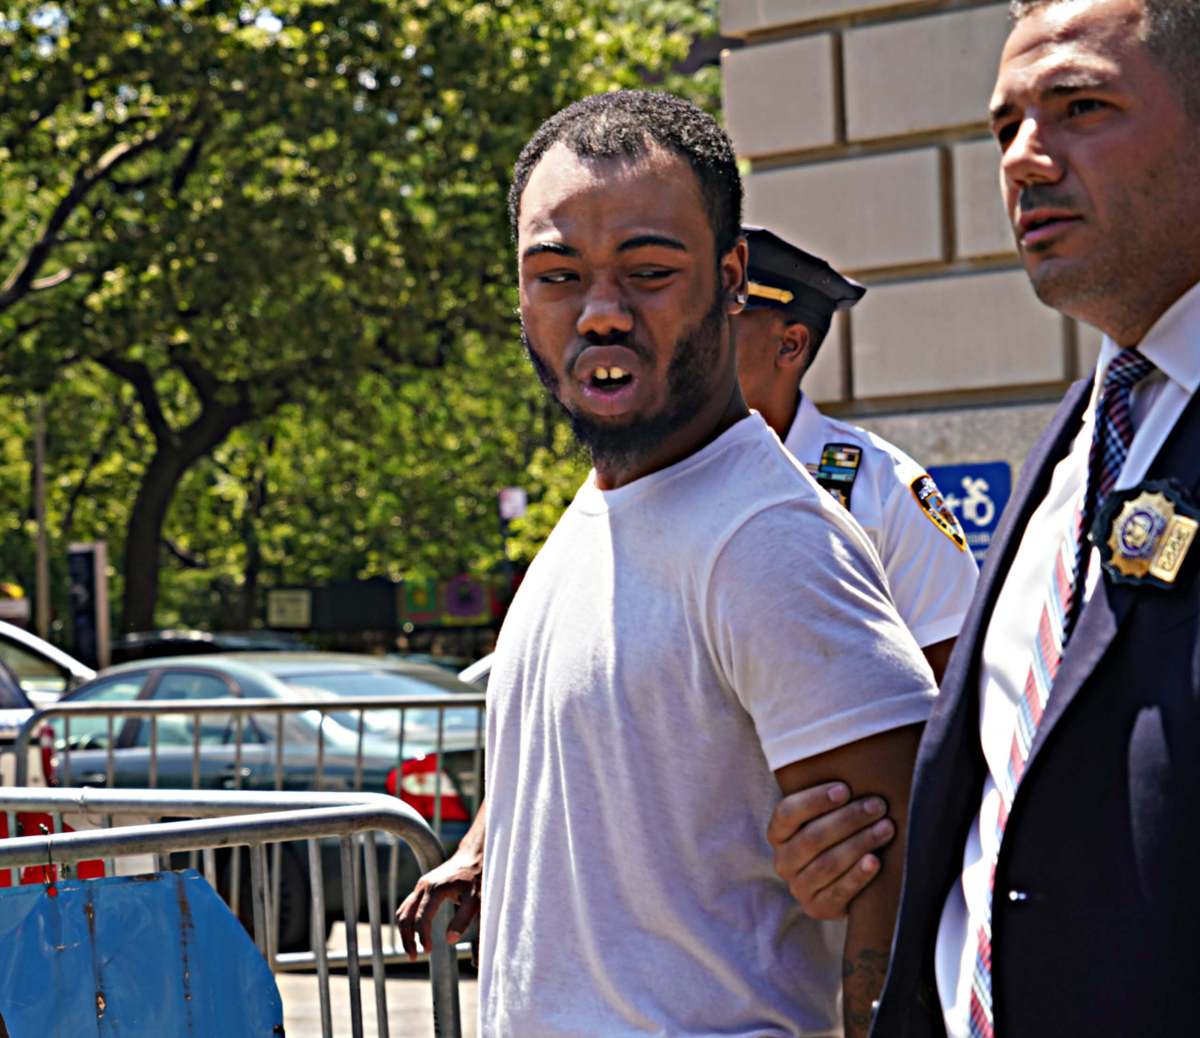 Bronx mom and her son cuffed for brutal murder of 7-year-old girl